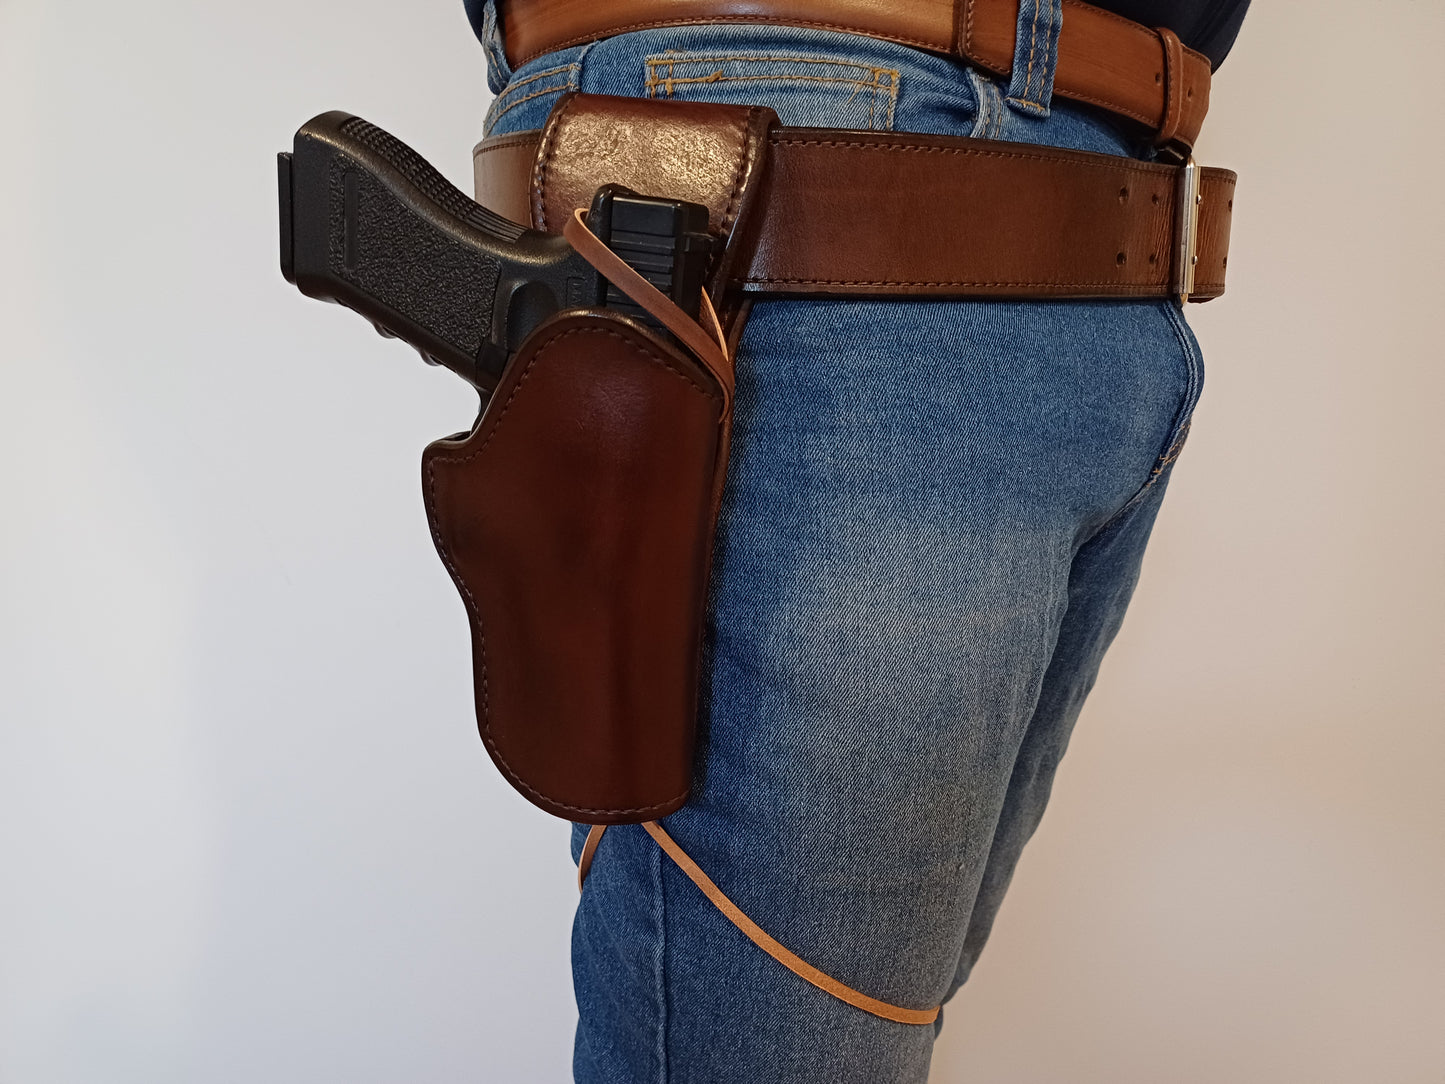 Leather Holster for Glock 17, 19, 21 Western style with leg tie (Made to order)